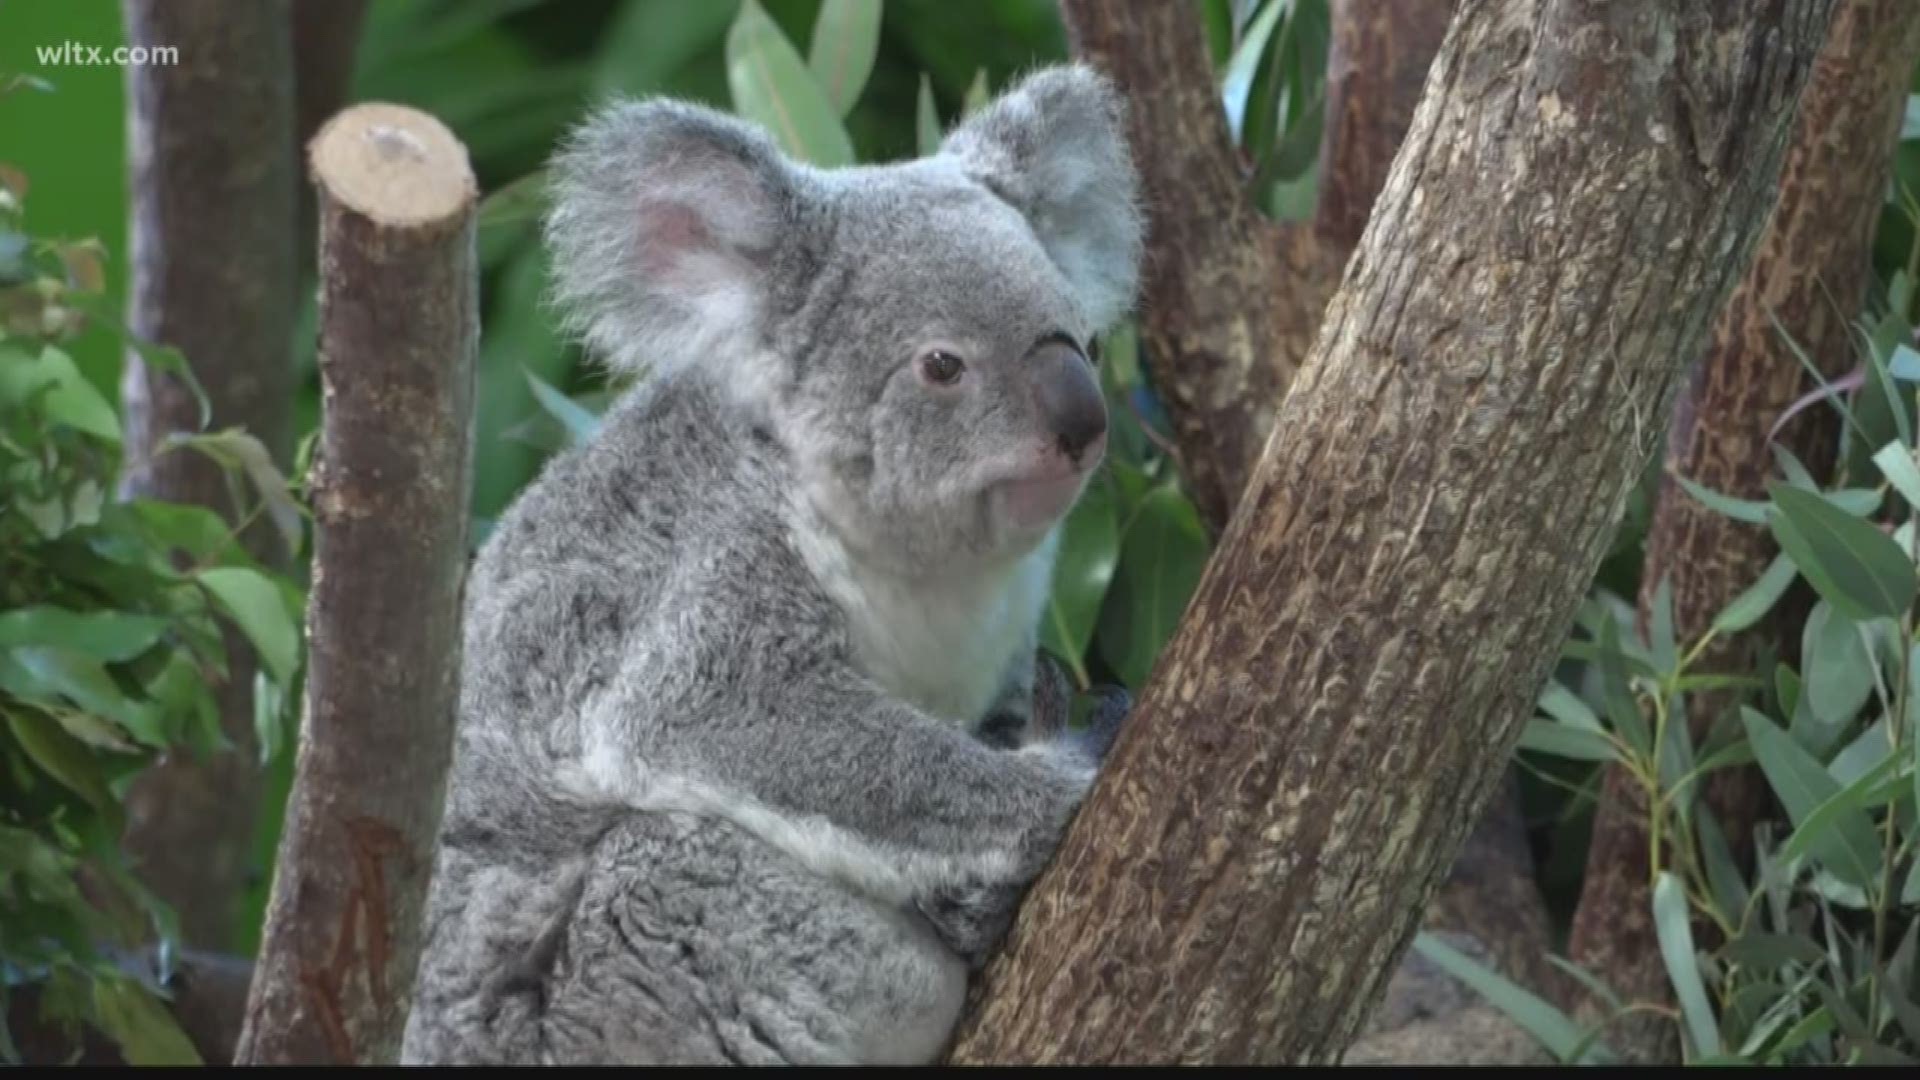 Riverbanks zoo is doing their part to help replenish the koala population.